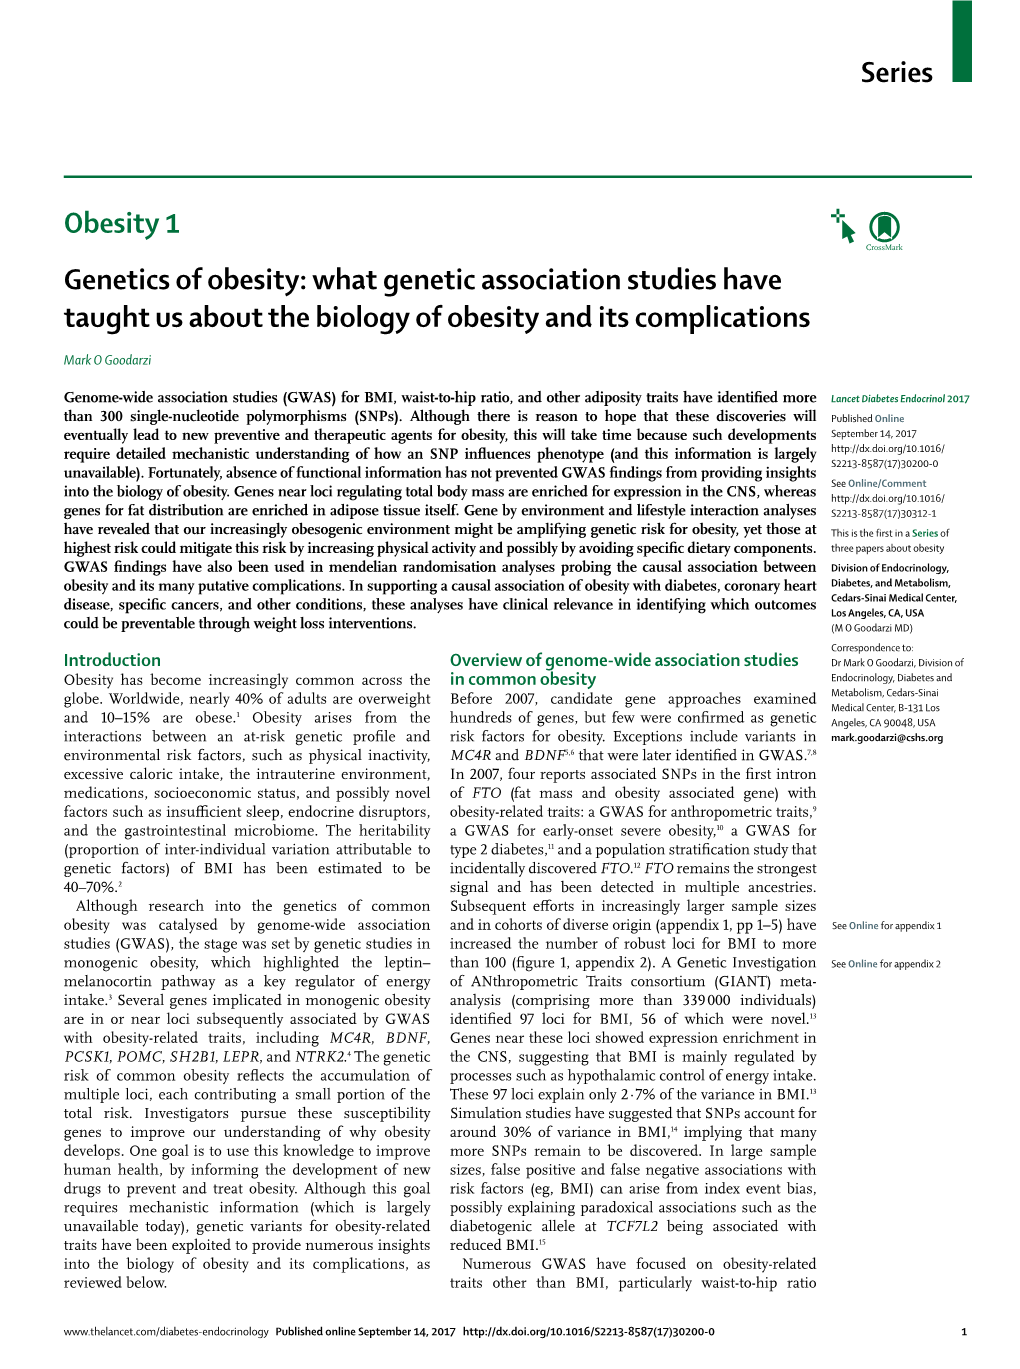 Genetics of Obesity: What Genetic Association Studies Have Taught Us About the Biology of Obesity and Its Complications